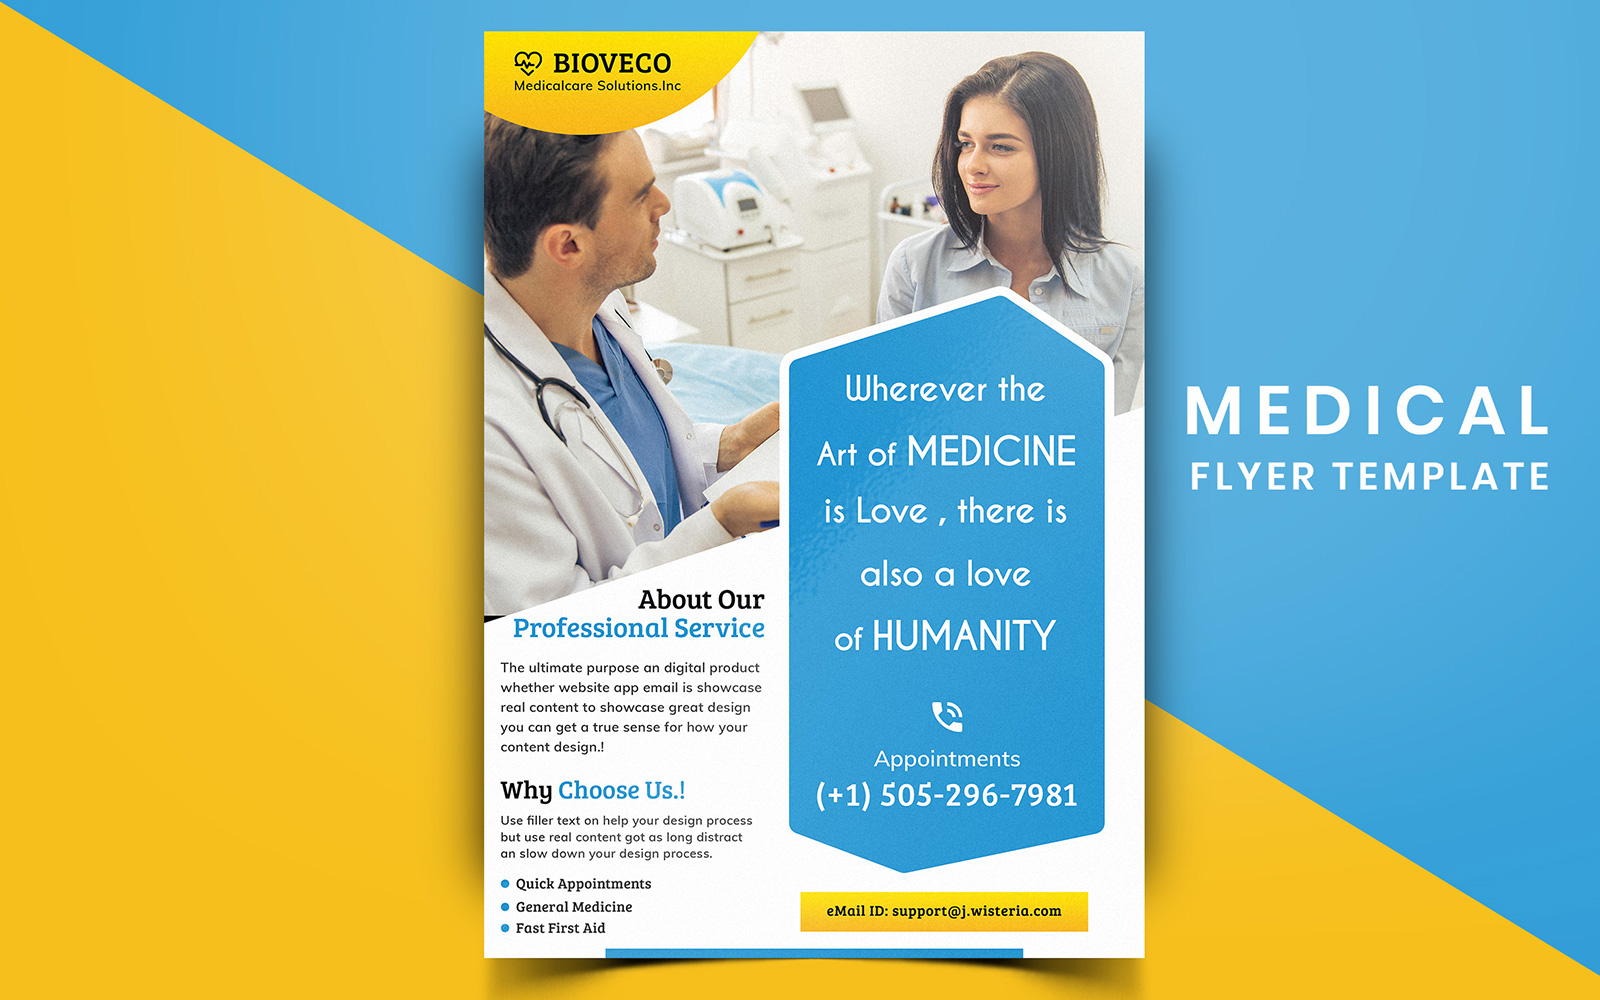 Wellmade - Medical Flyer Design - Corporate Identity Template